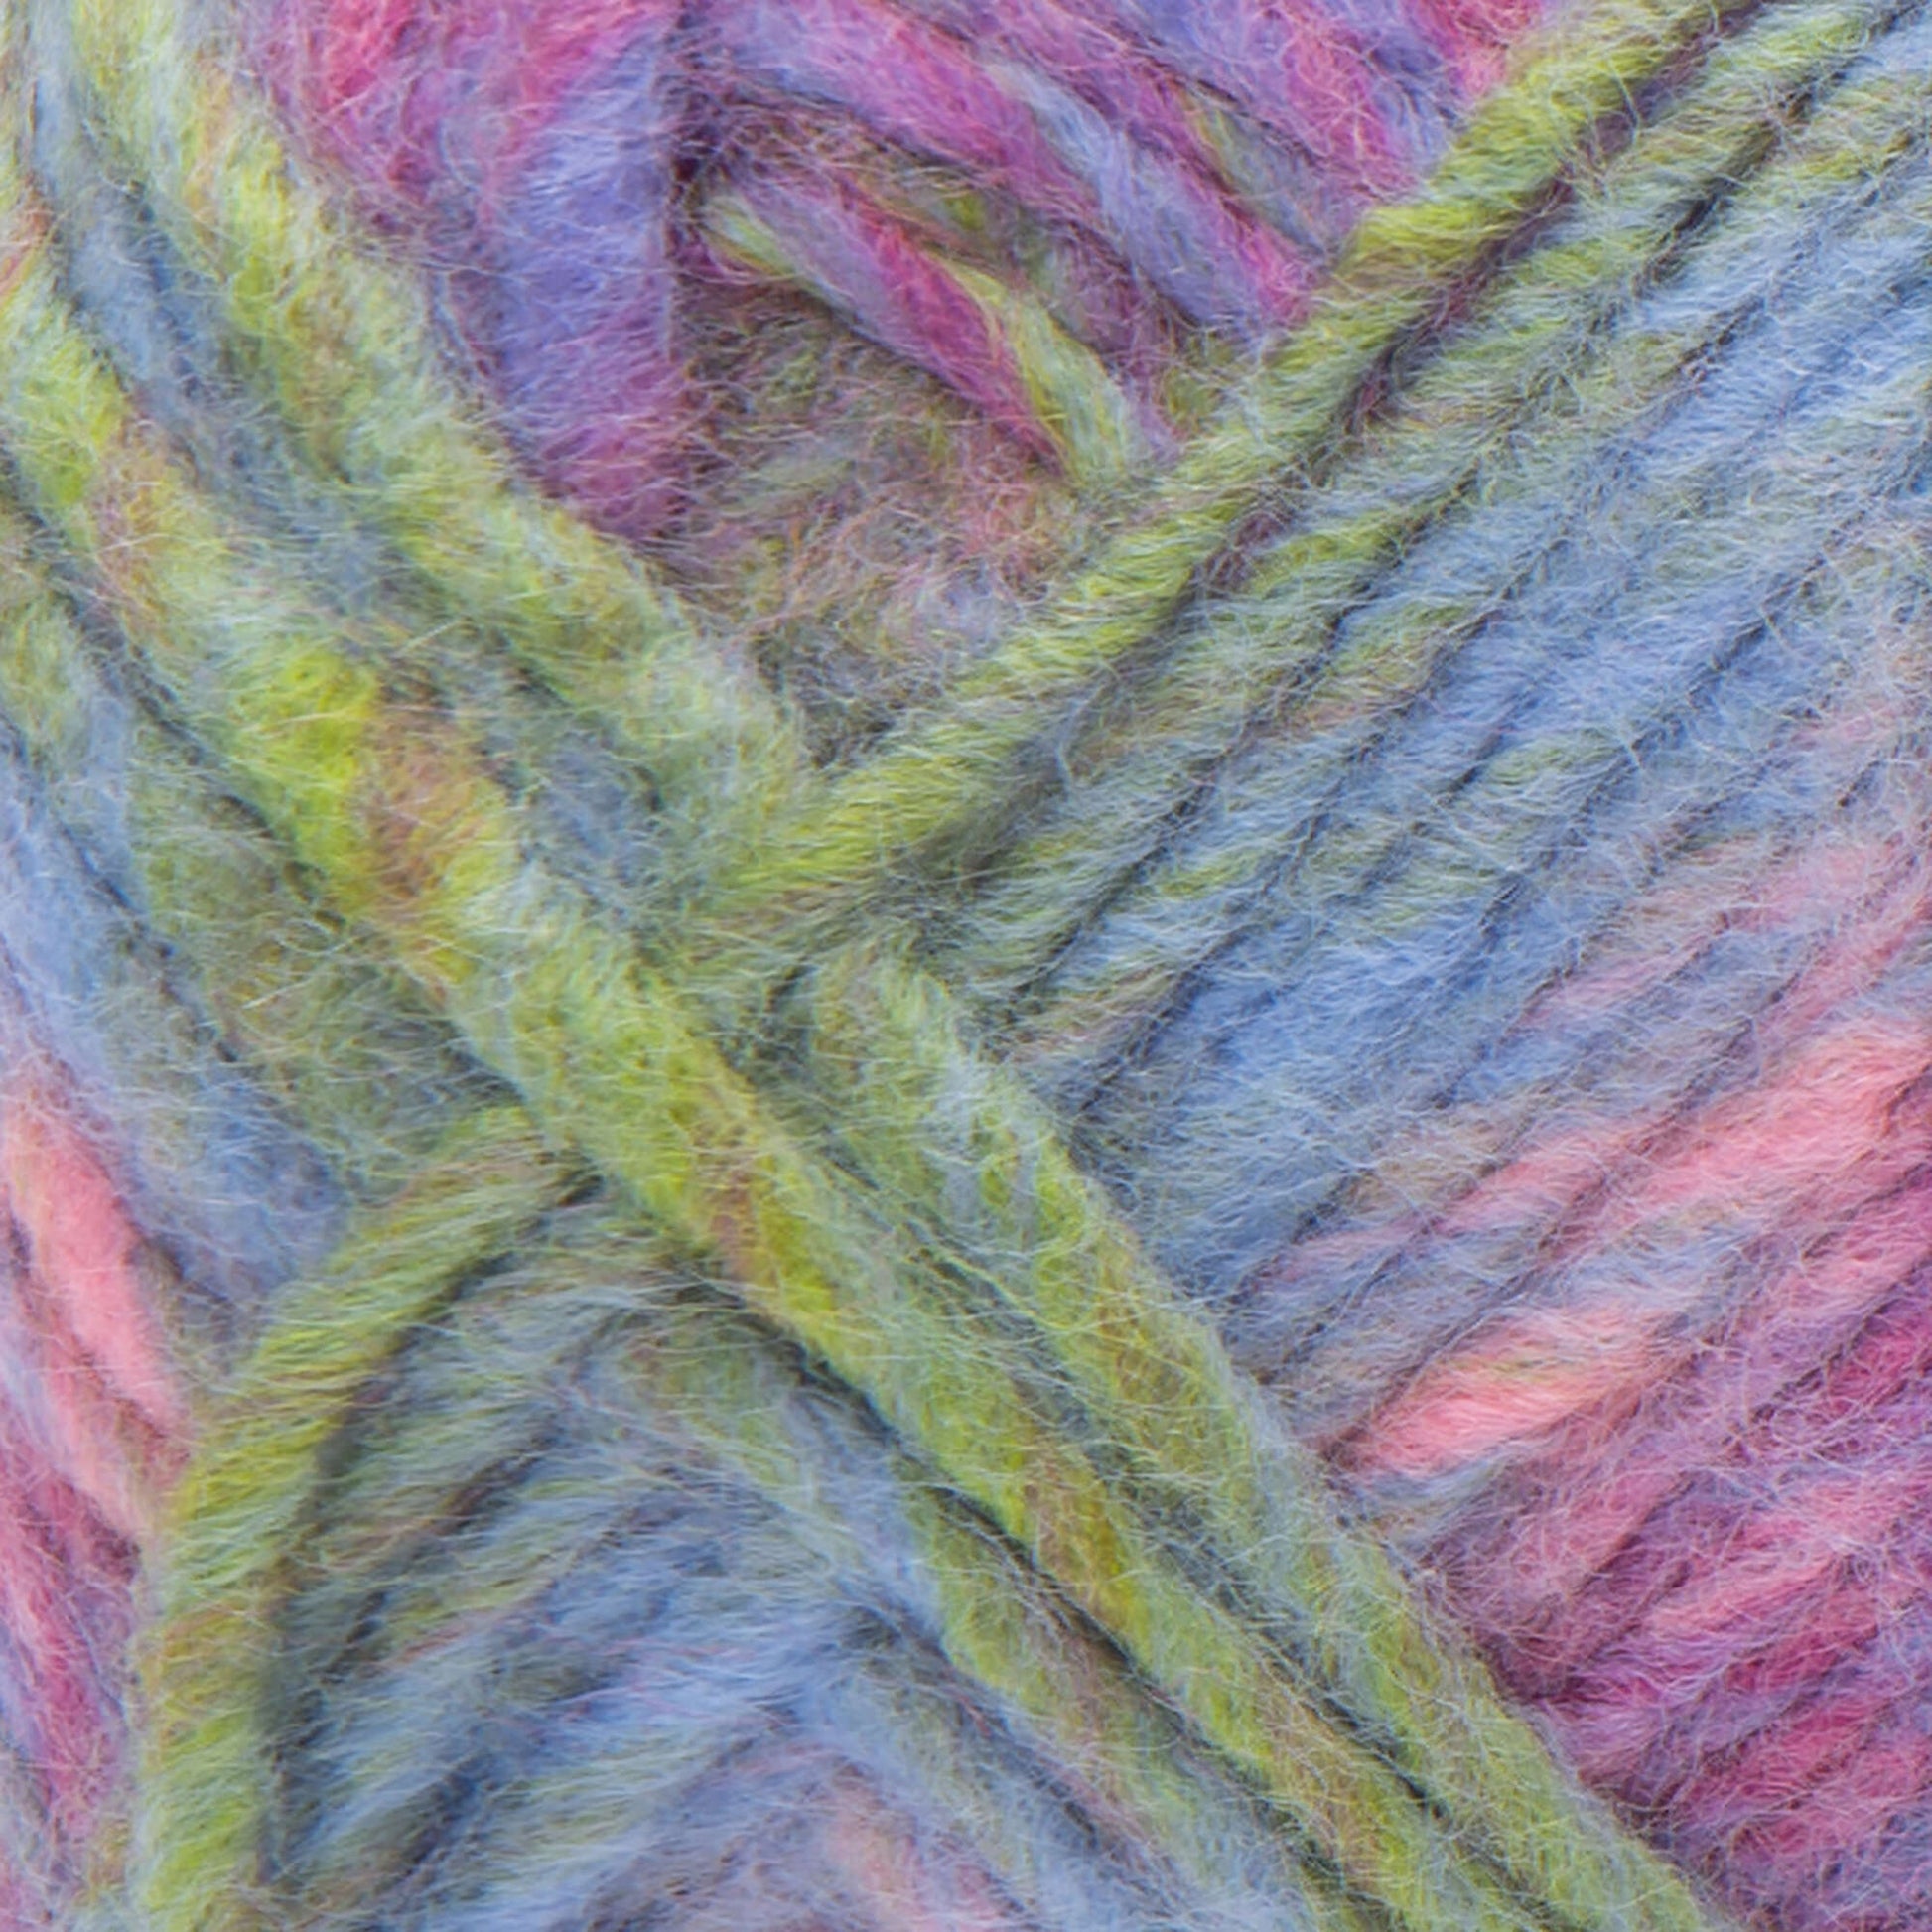 Red Heart Colorscape Yarn - Discontinued shades Shanghai